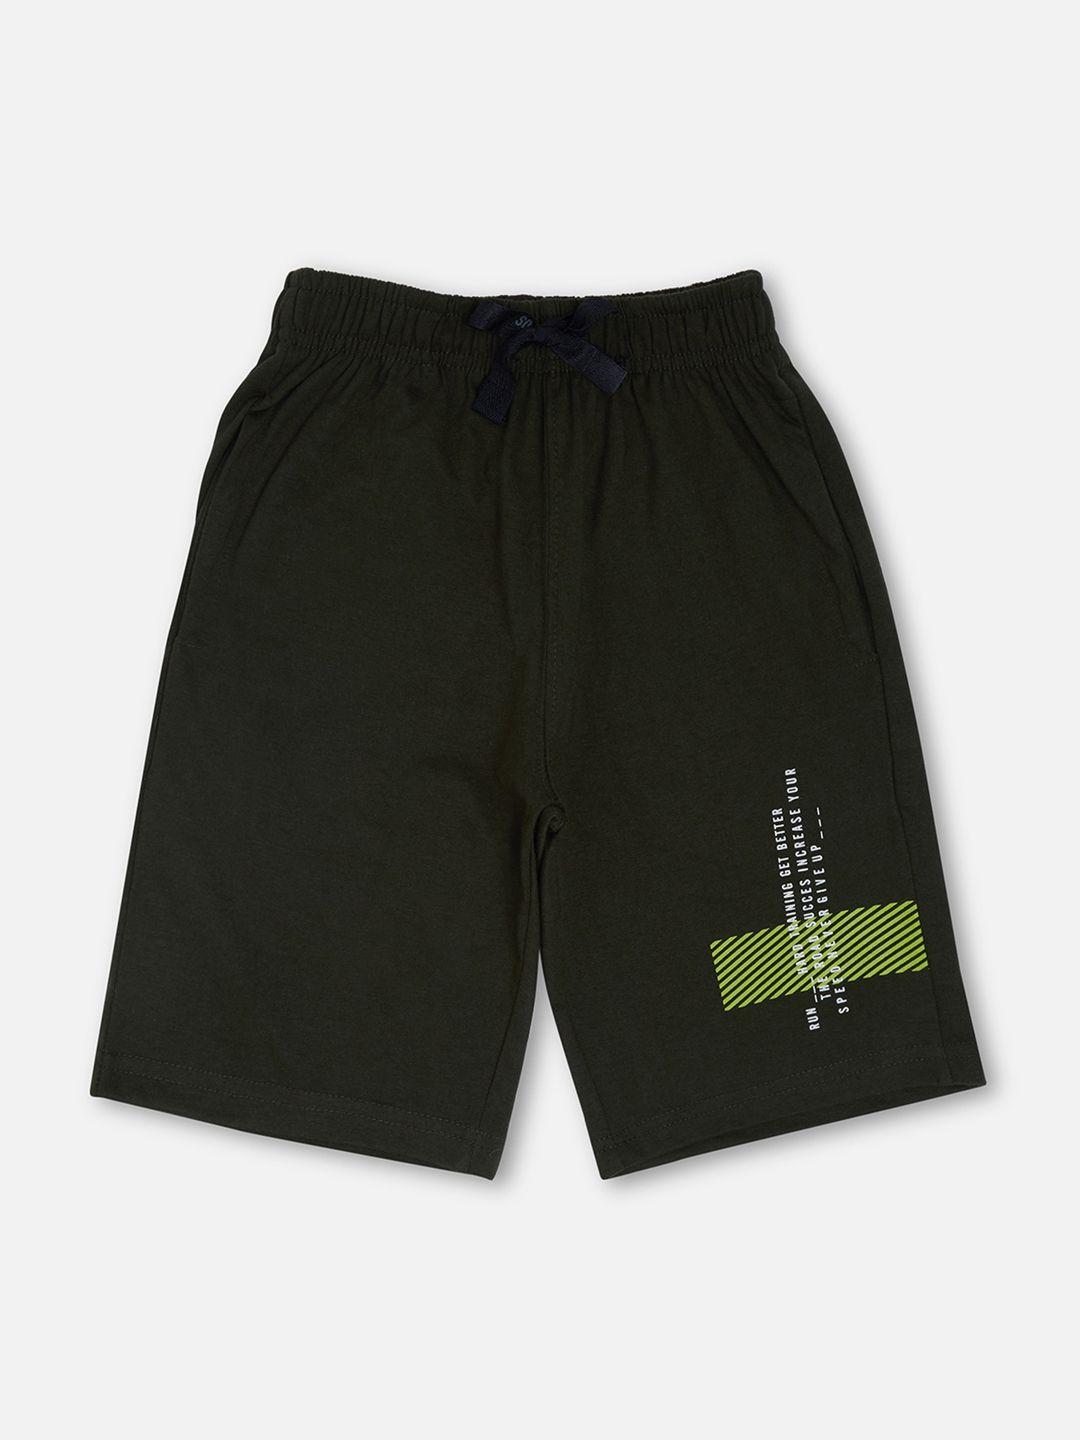 sweet dreams boys olive green typography printed cotton shorts